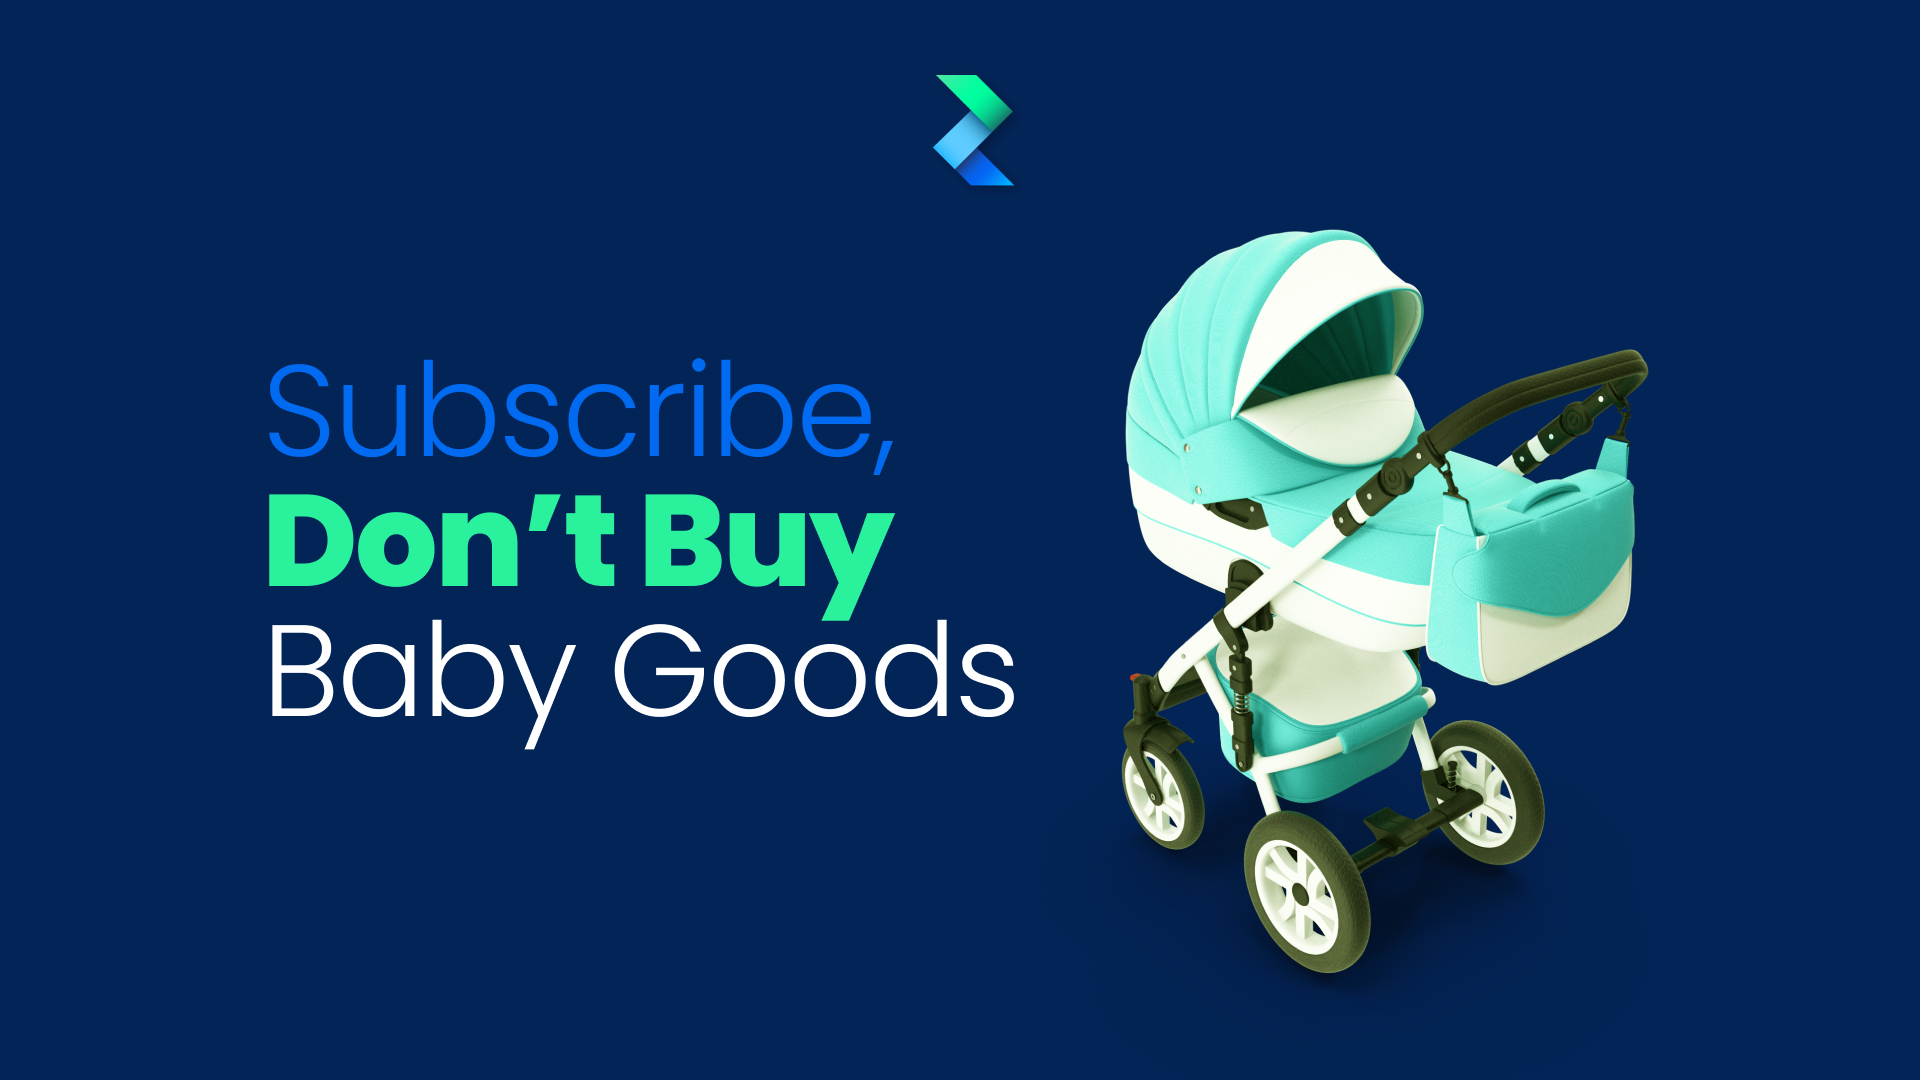 Subscribe, Don’t Buy Baby Goods